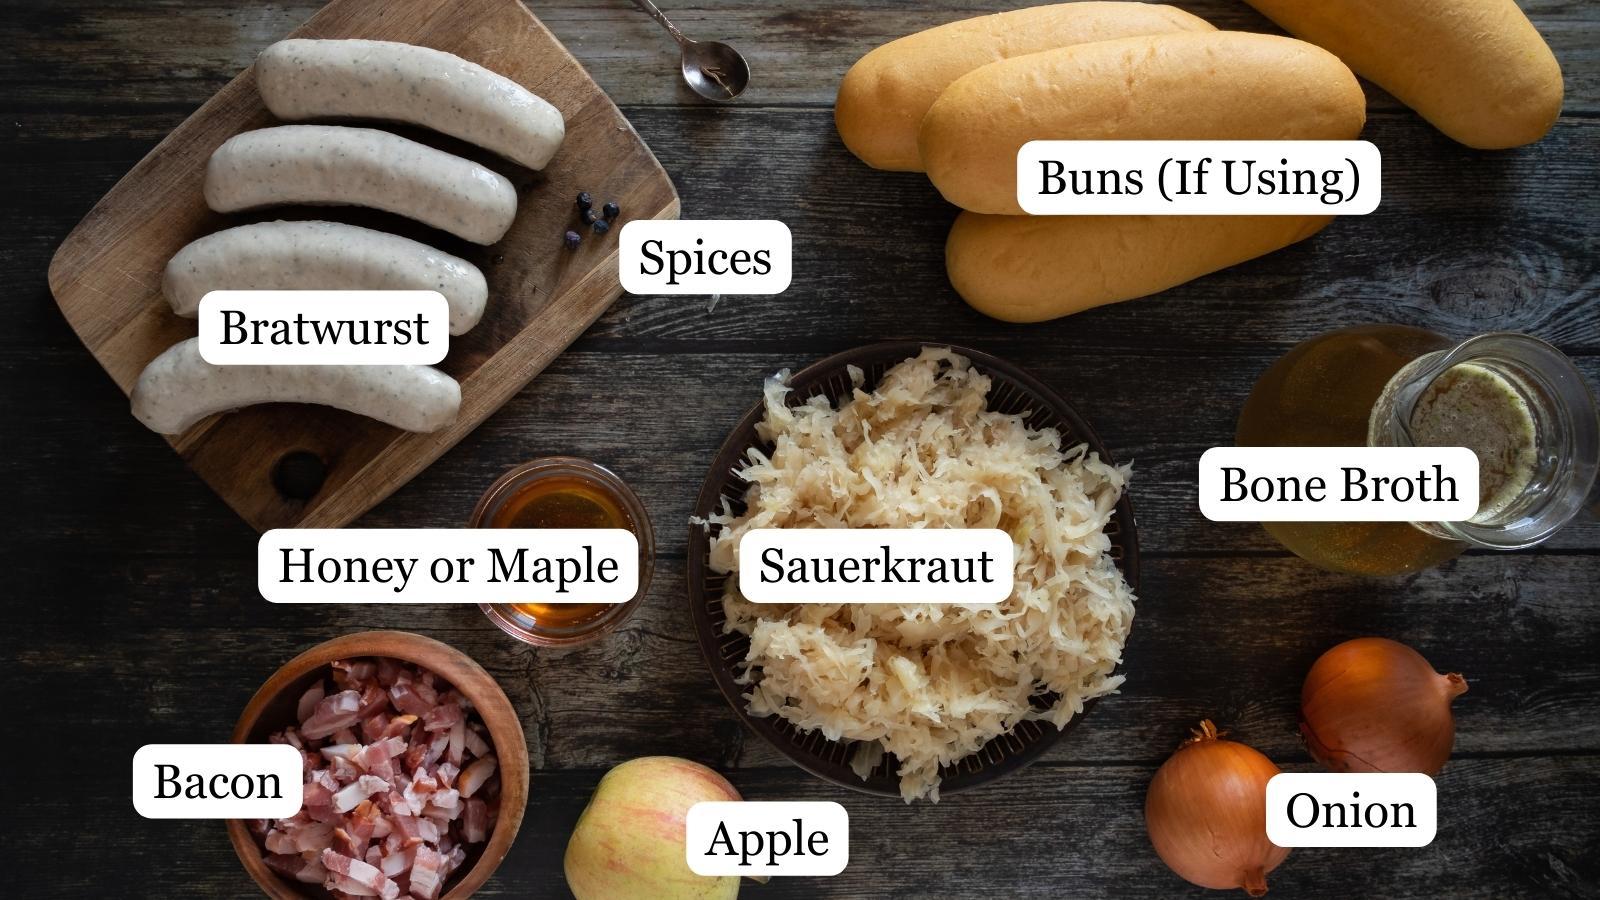 All of the ingredients needed to make bratwurst and sauerkraut in your cast iron skillet, and the extras needed if making them as sausages on a bun.